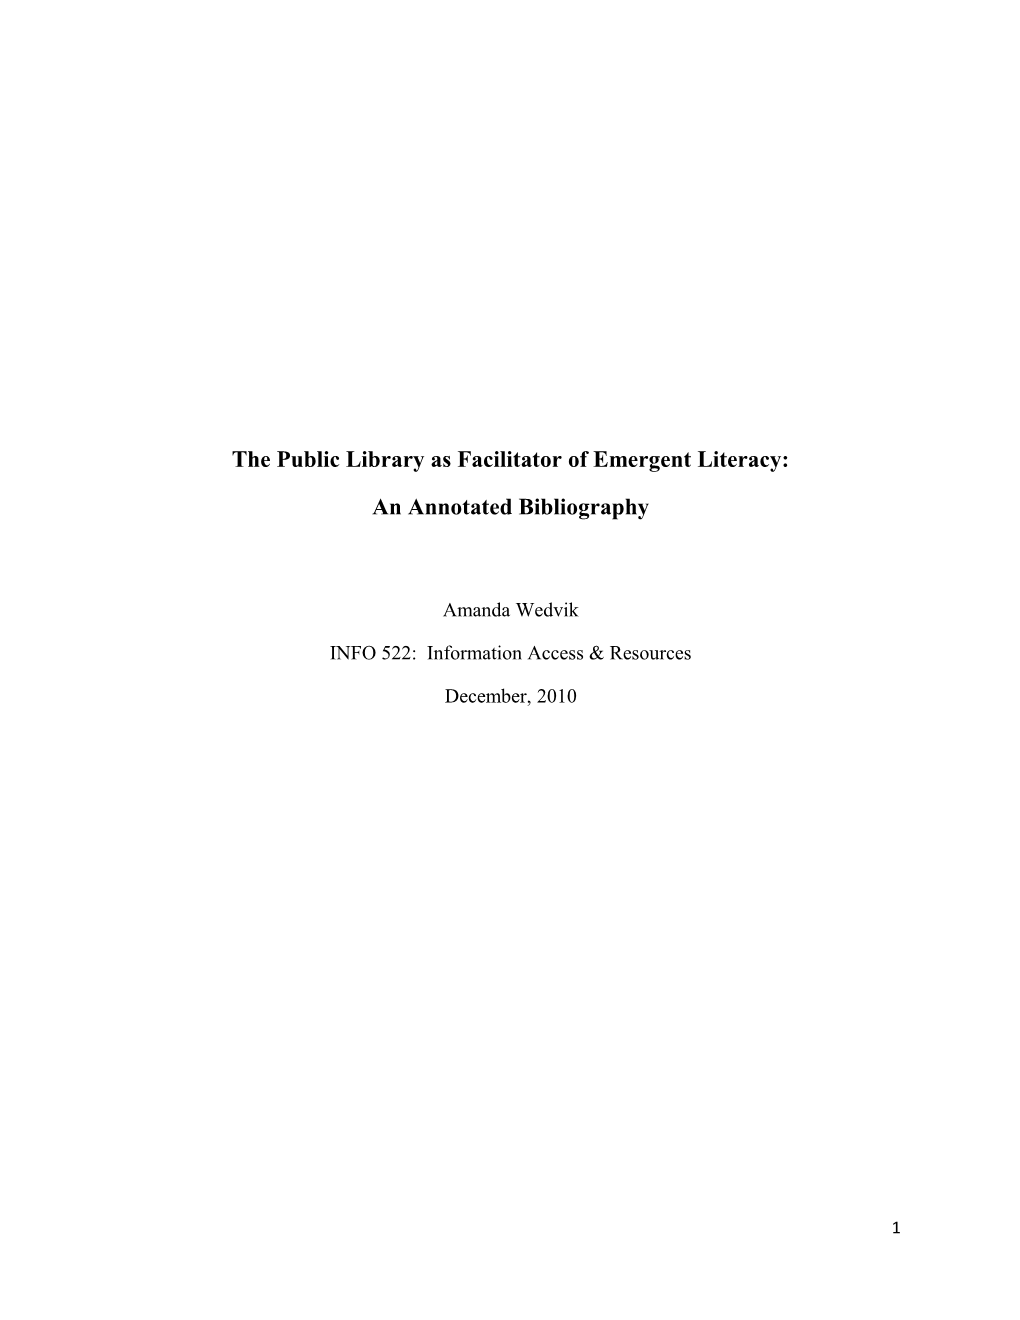 The Public Library As Facilitator of Emergent Literacy